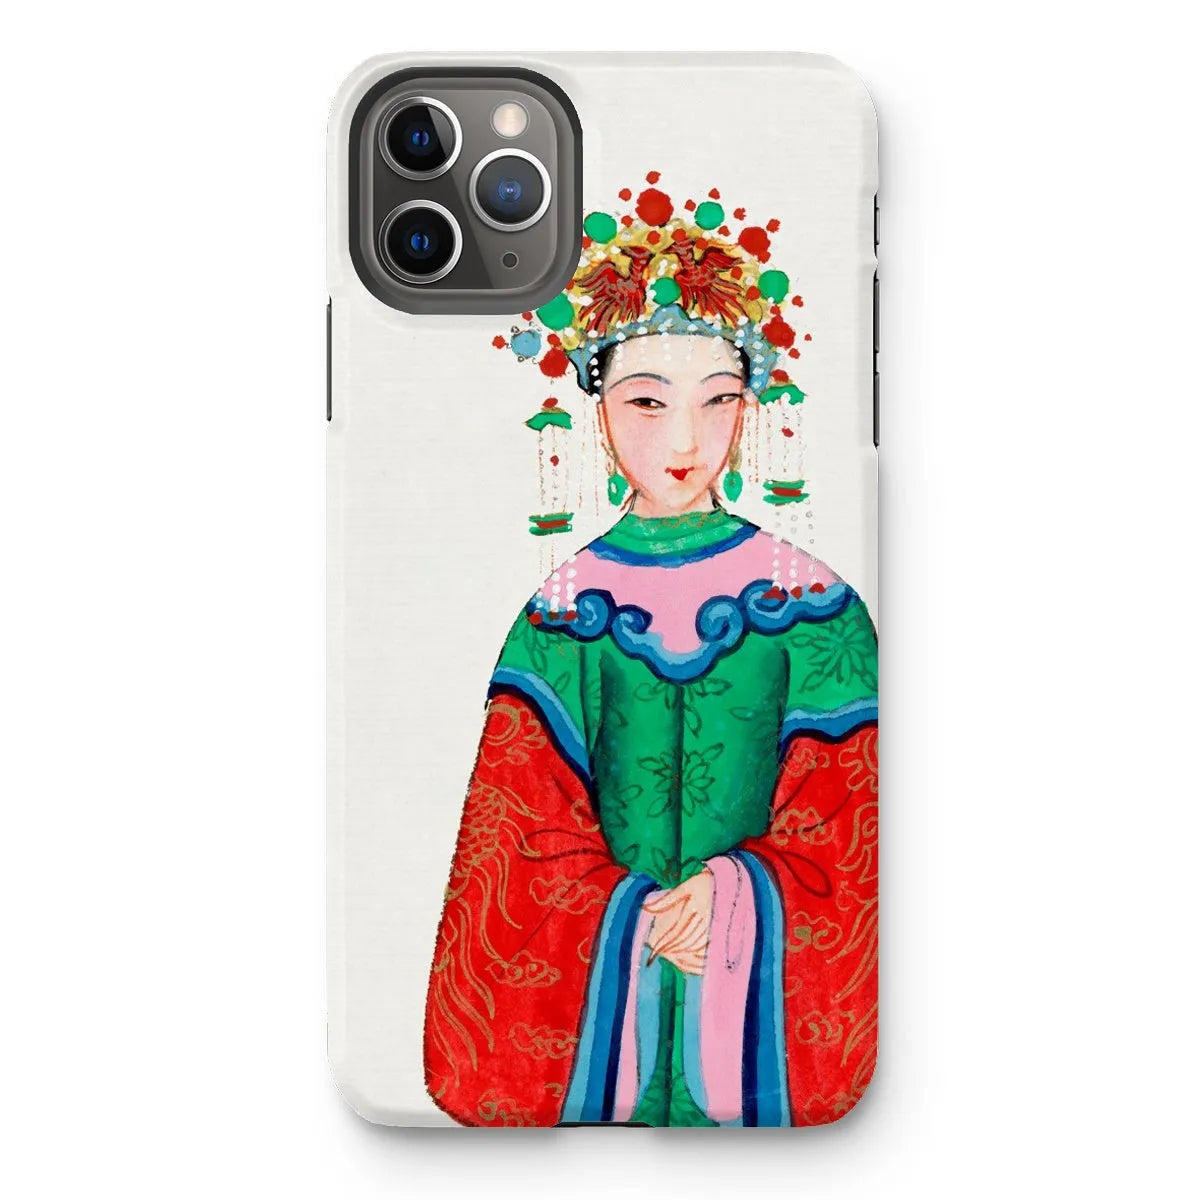 Imperial Princess - Chinese Aesthetic Painting Phone Case - Iphone 11 Pro Max / Matte - Mobile Phone Cases - Aesthetic